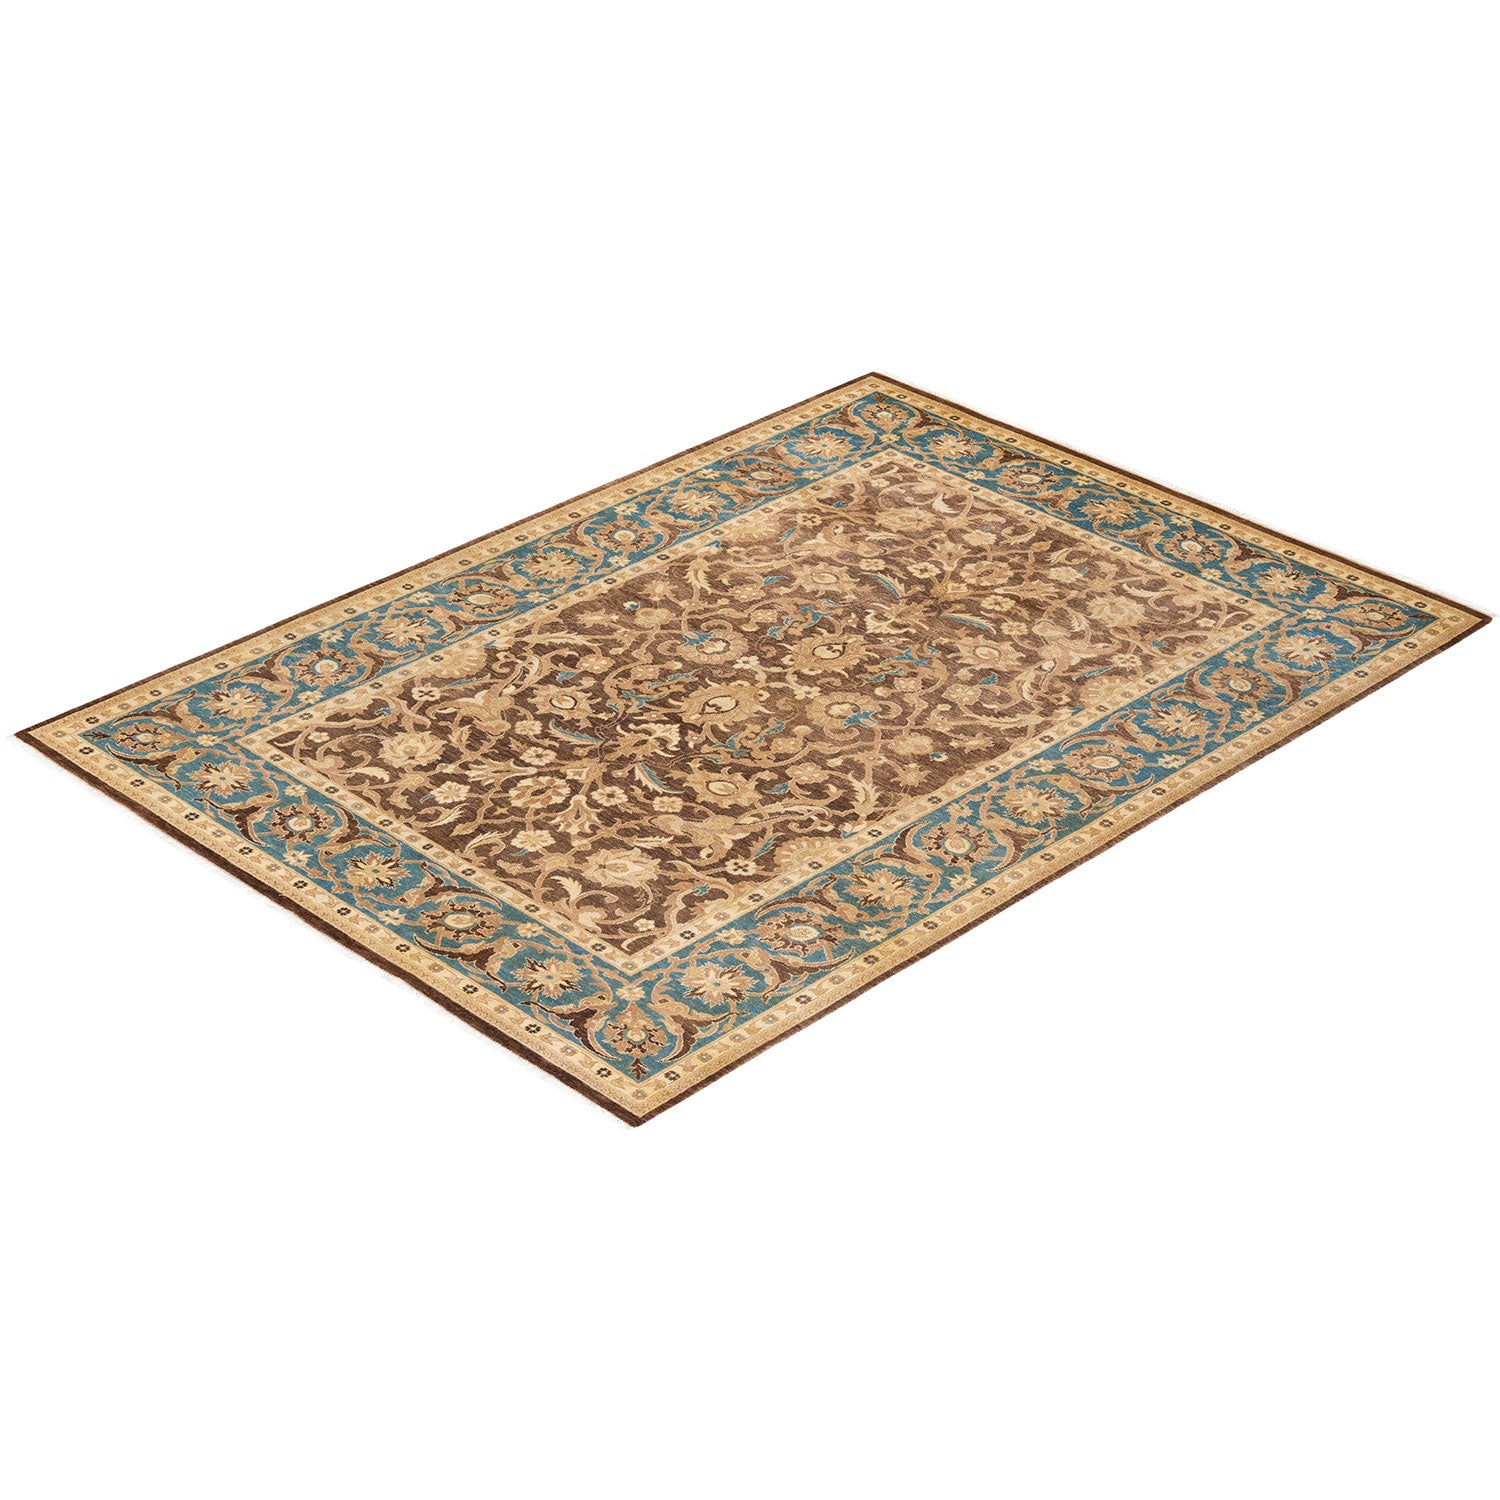 Intricate rectangular area rug with Persian-inspired design in earth tones.